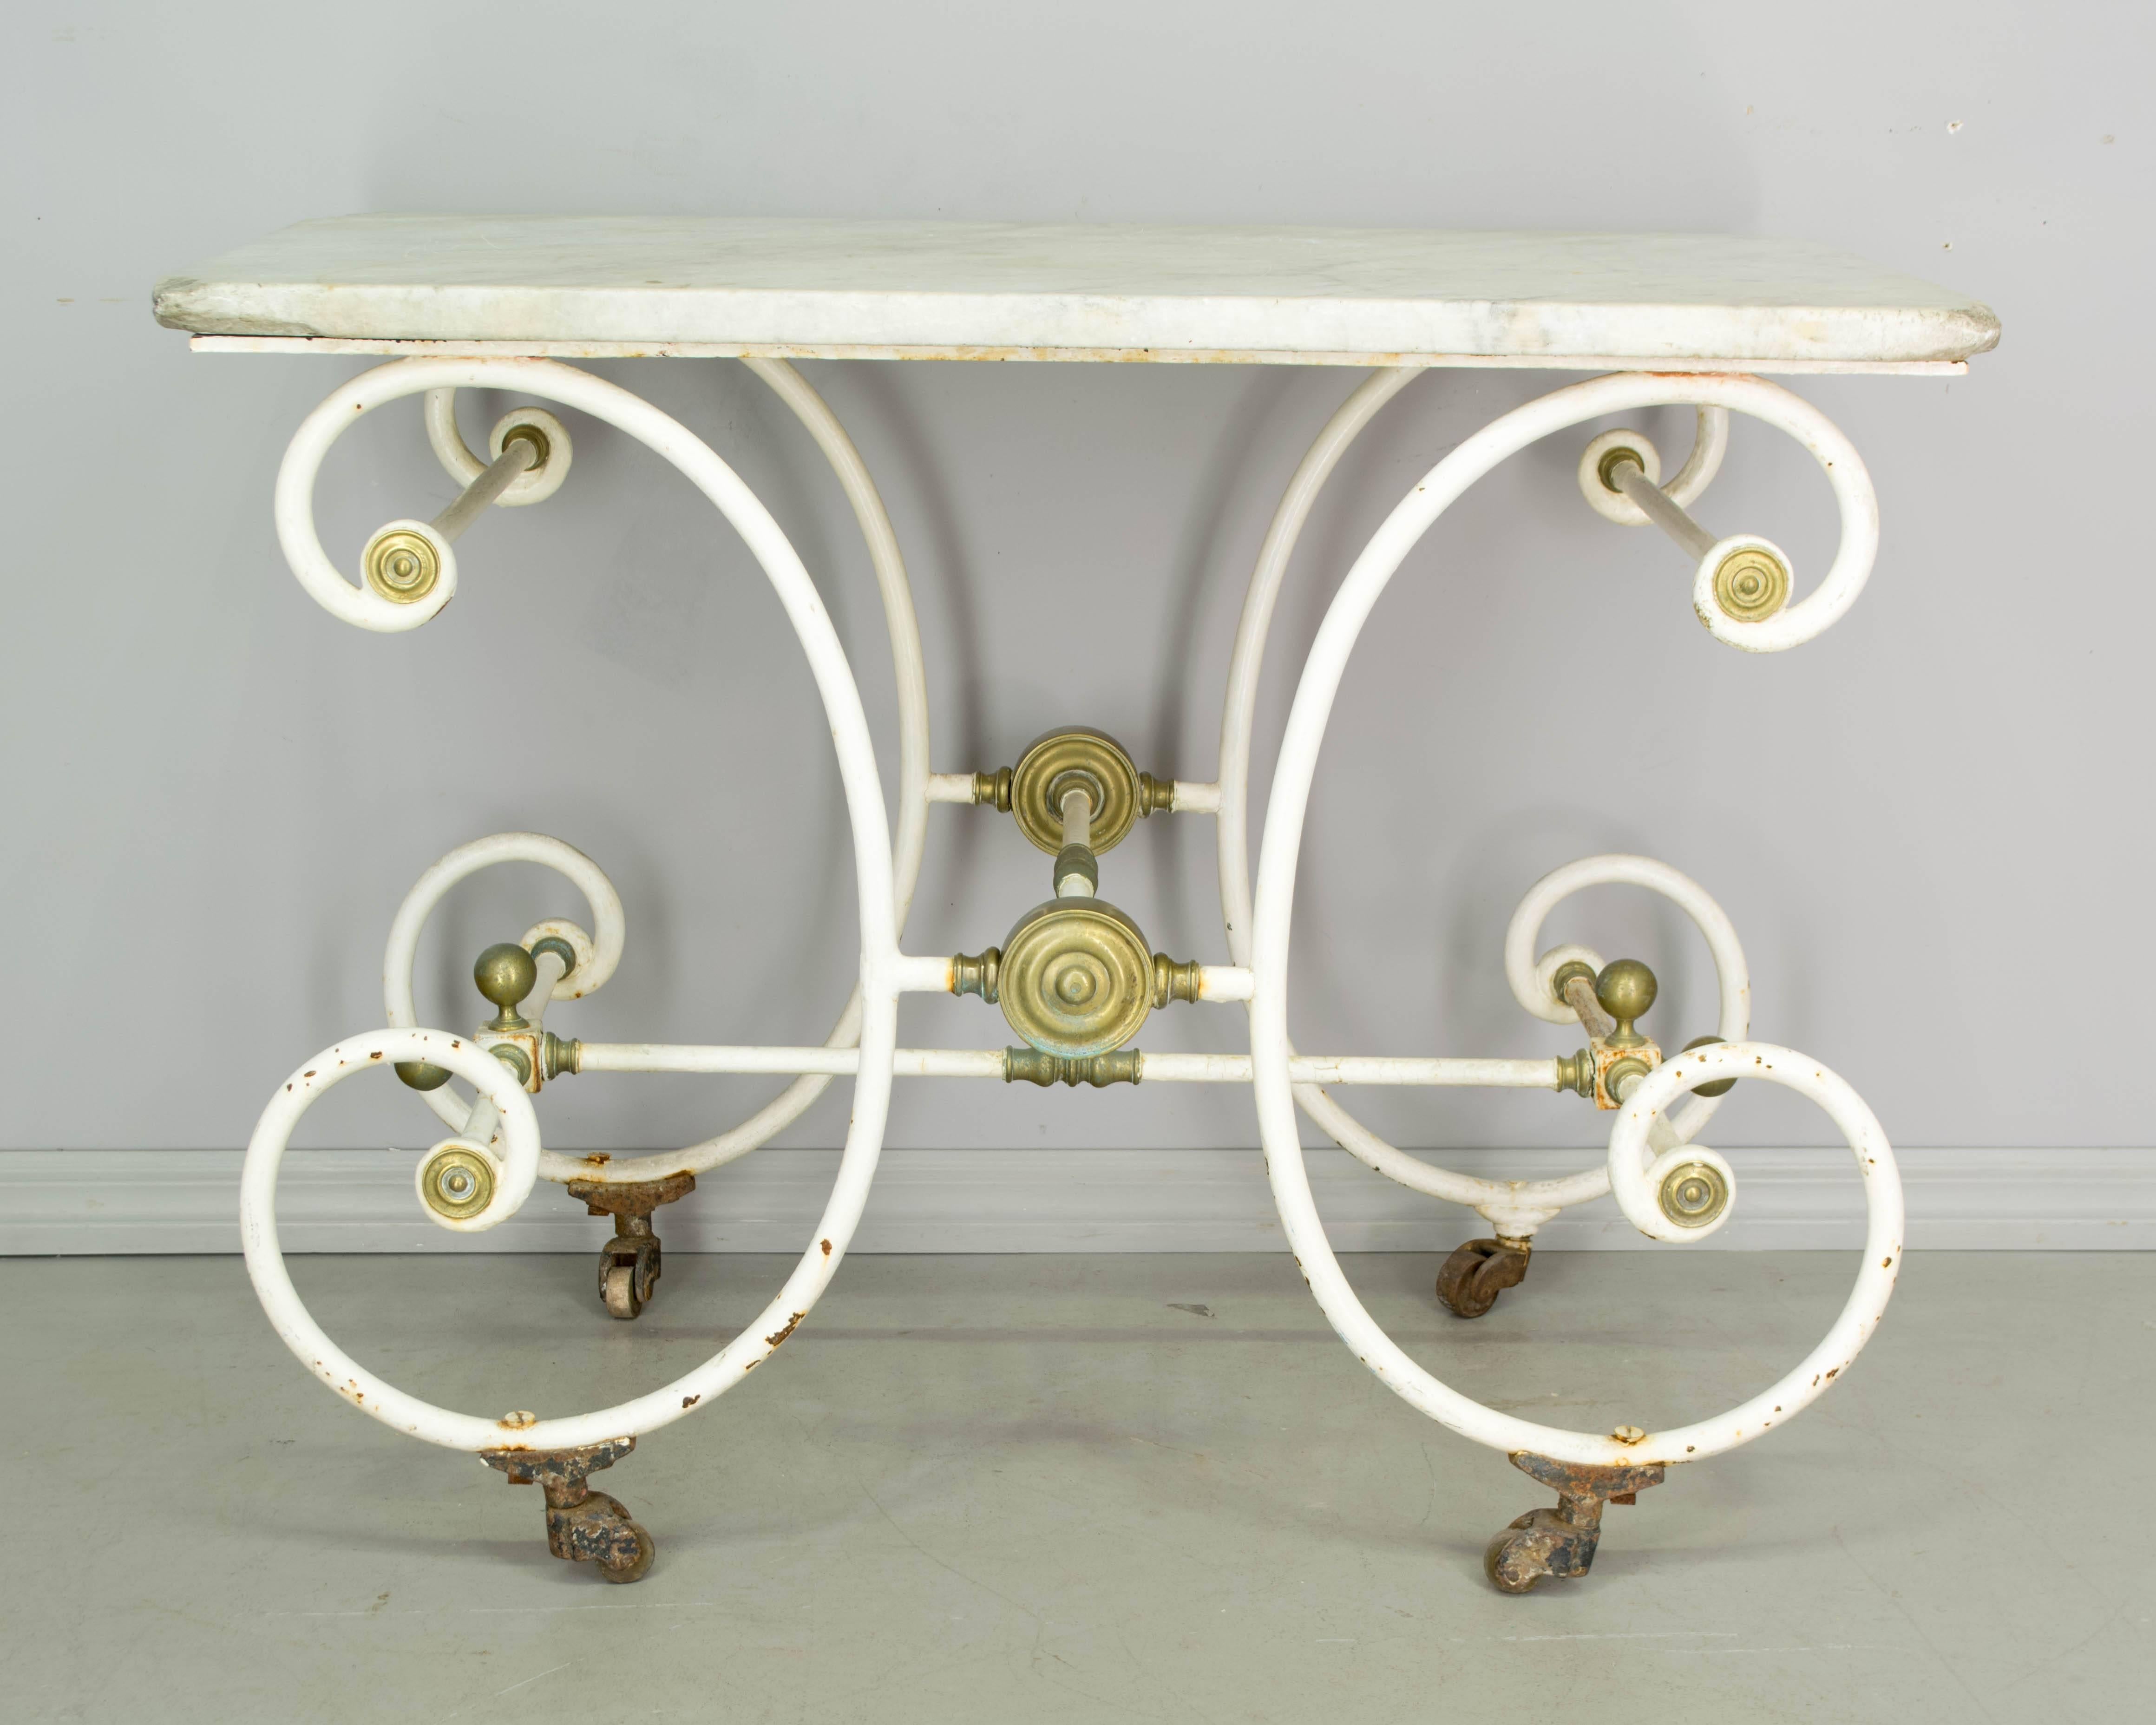 19th century French wrought iron baker's or pastry table with original white painted patina and brass decorative details. Original worn marble top and castors.